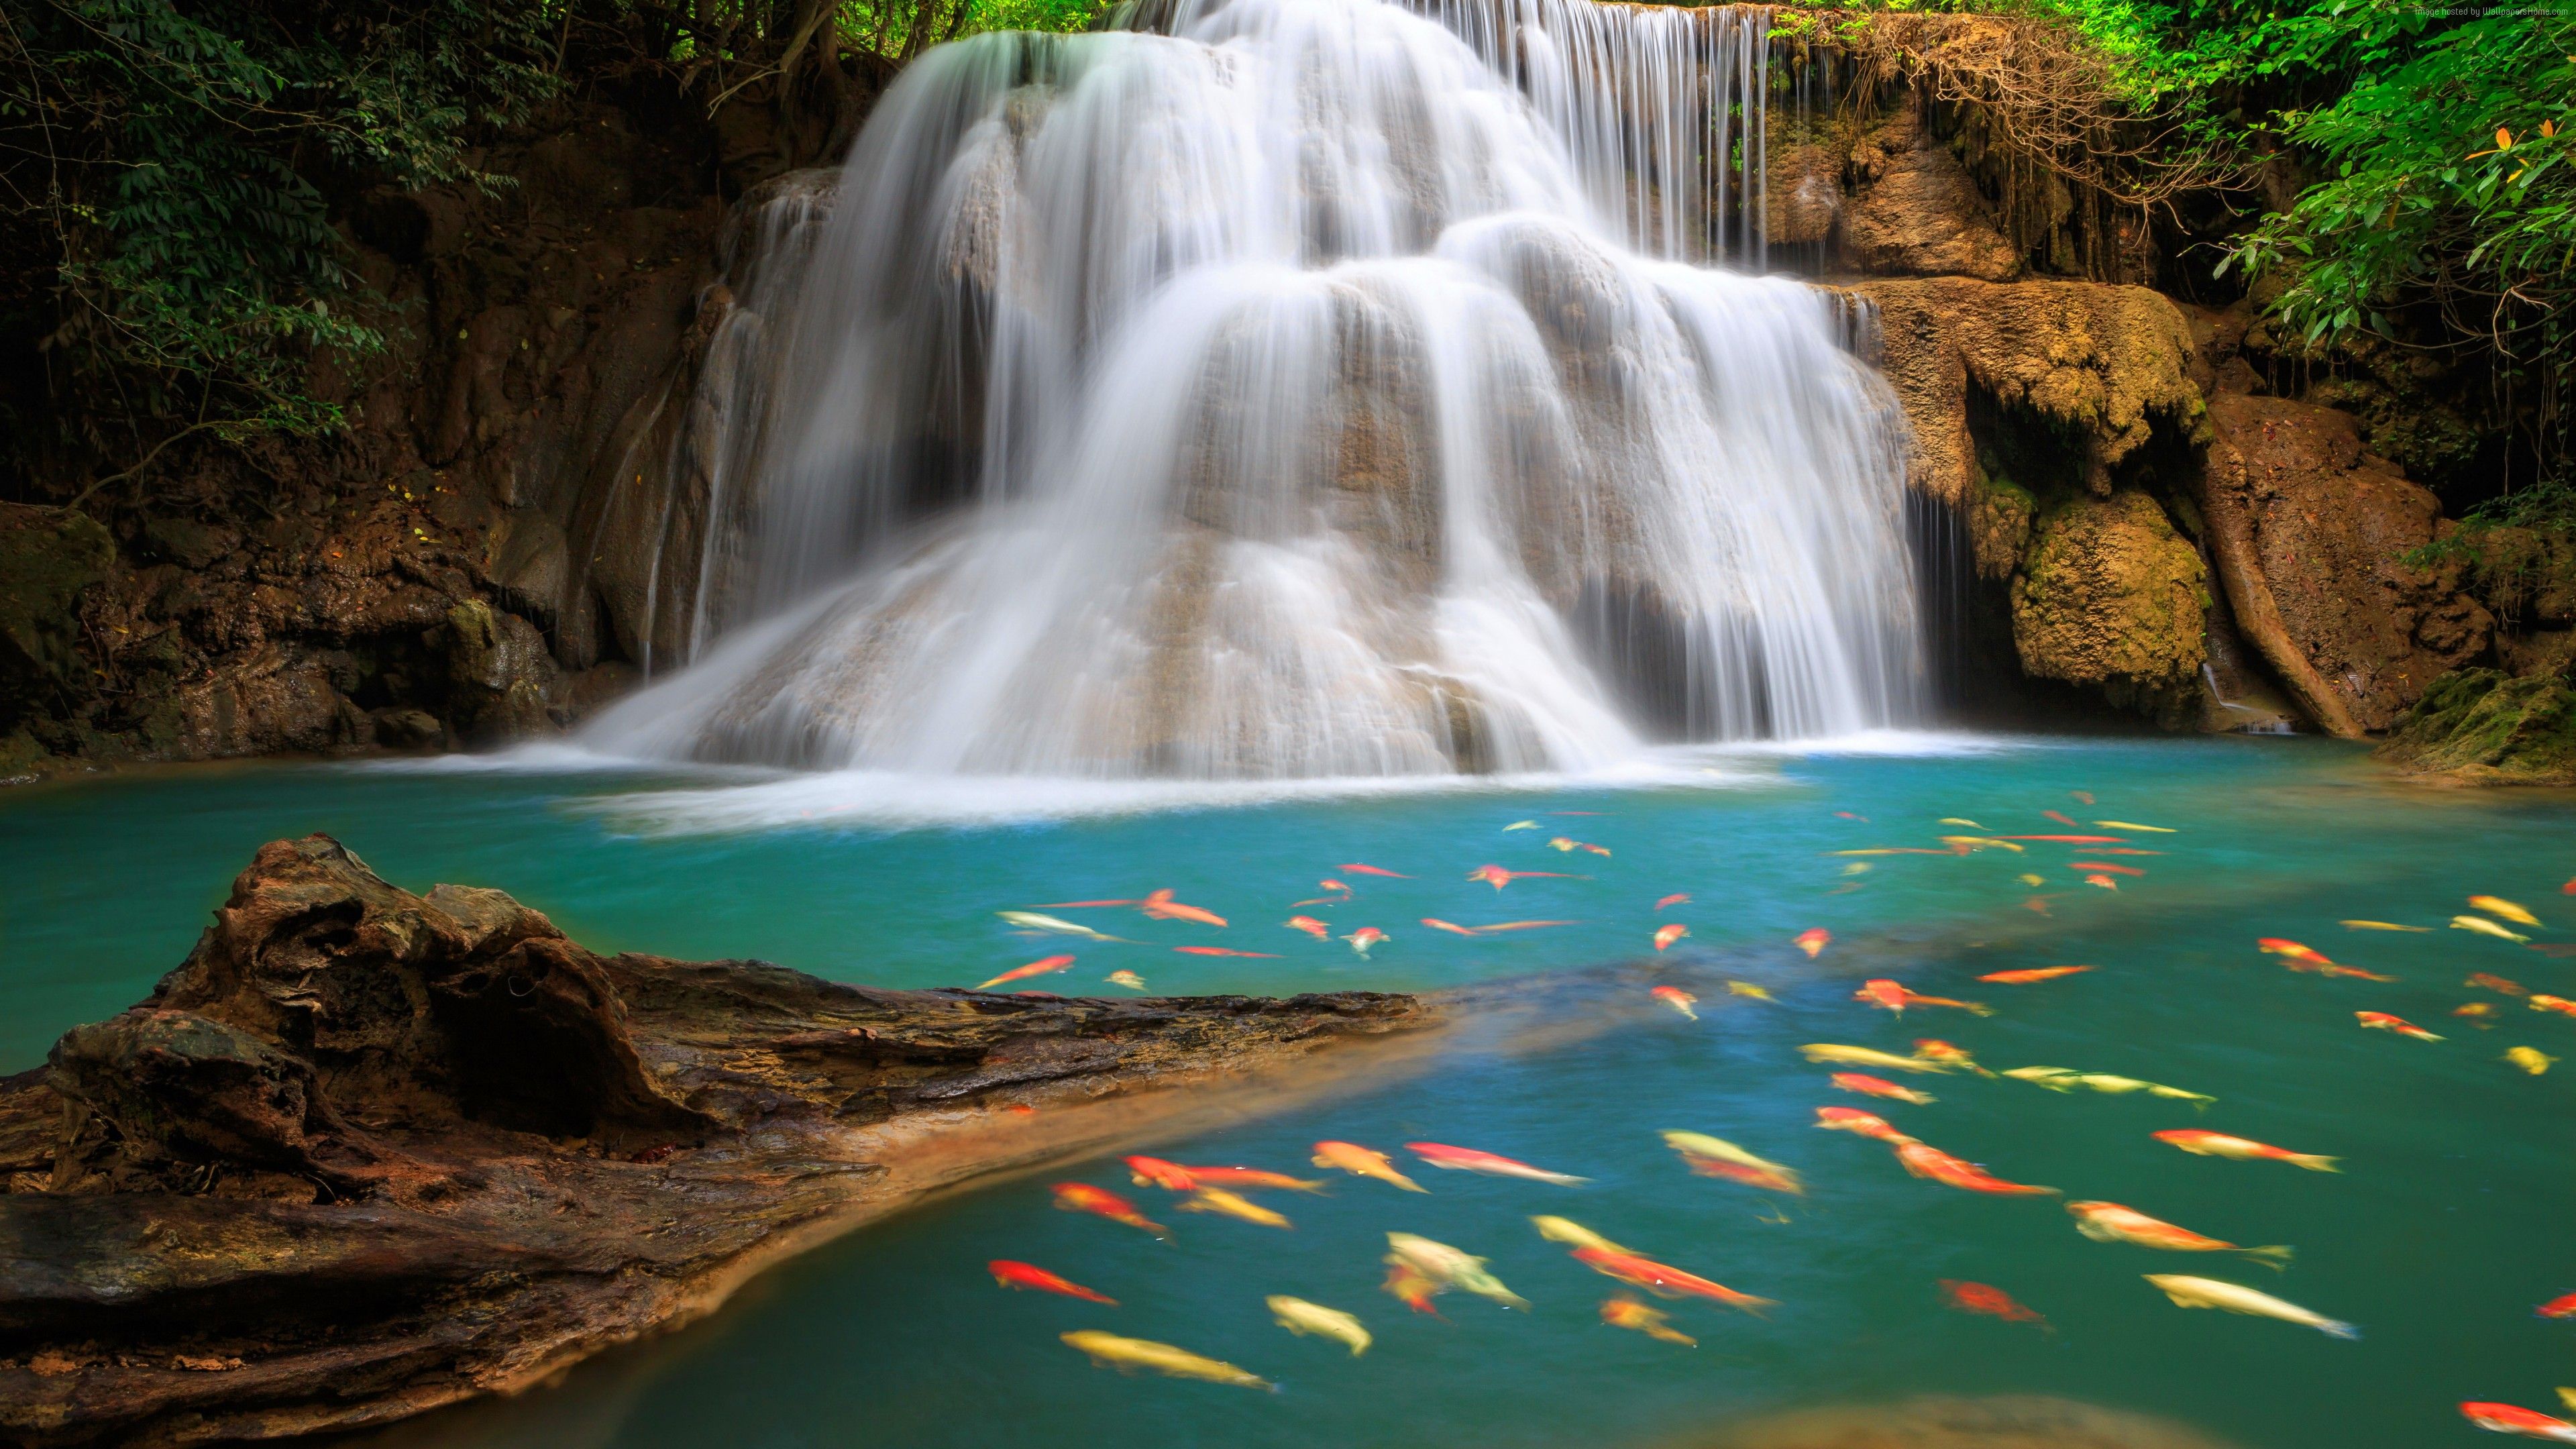 The Huai Mae Khamin Waterfall Is One Of The Most Popular Places of pattaya Thailand. Waterfall wallpaper, Waterfall, Scenery